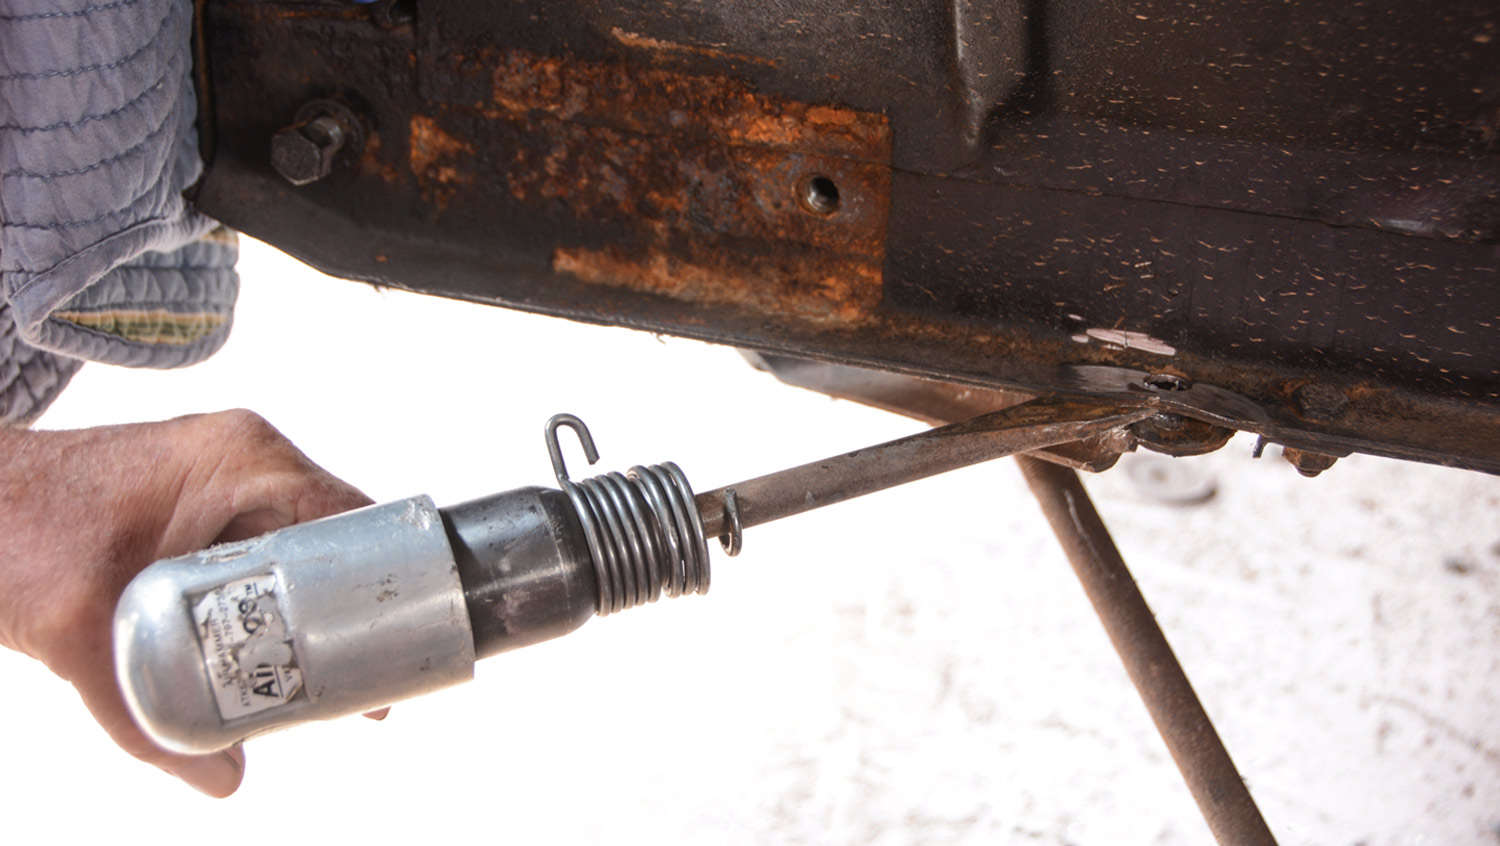 mechanic uses an air chisel to remove the rivets that hold the strut rod brackets to the framerails